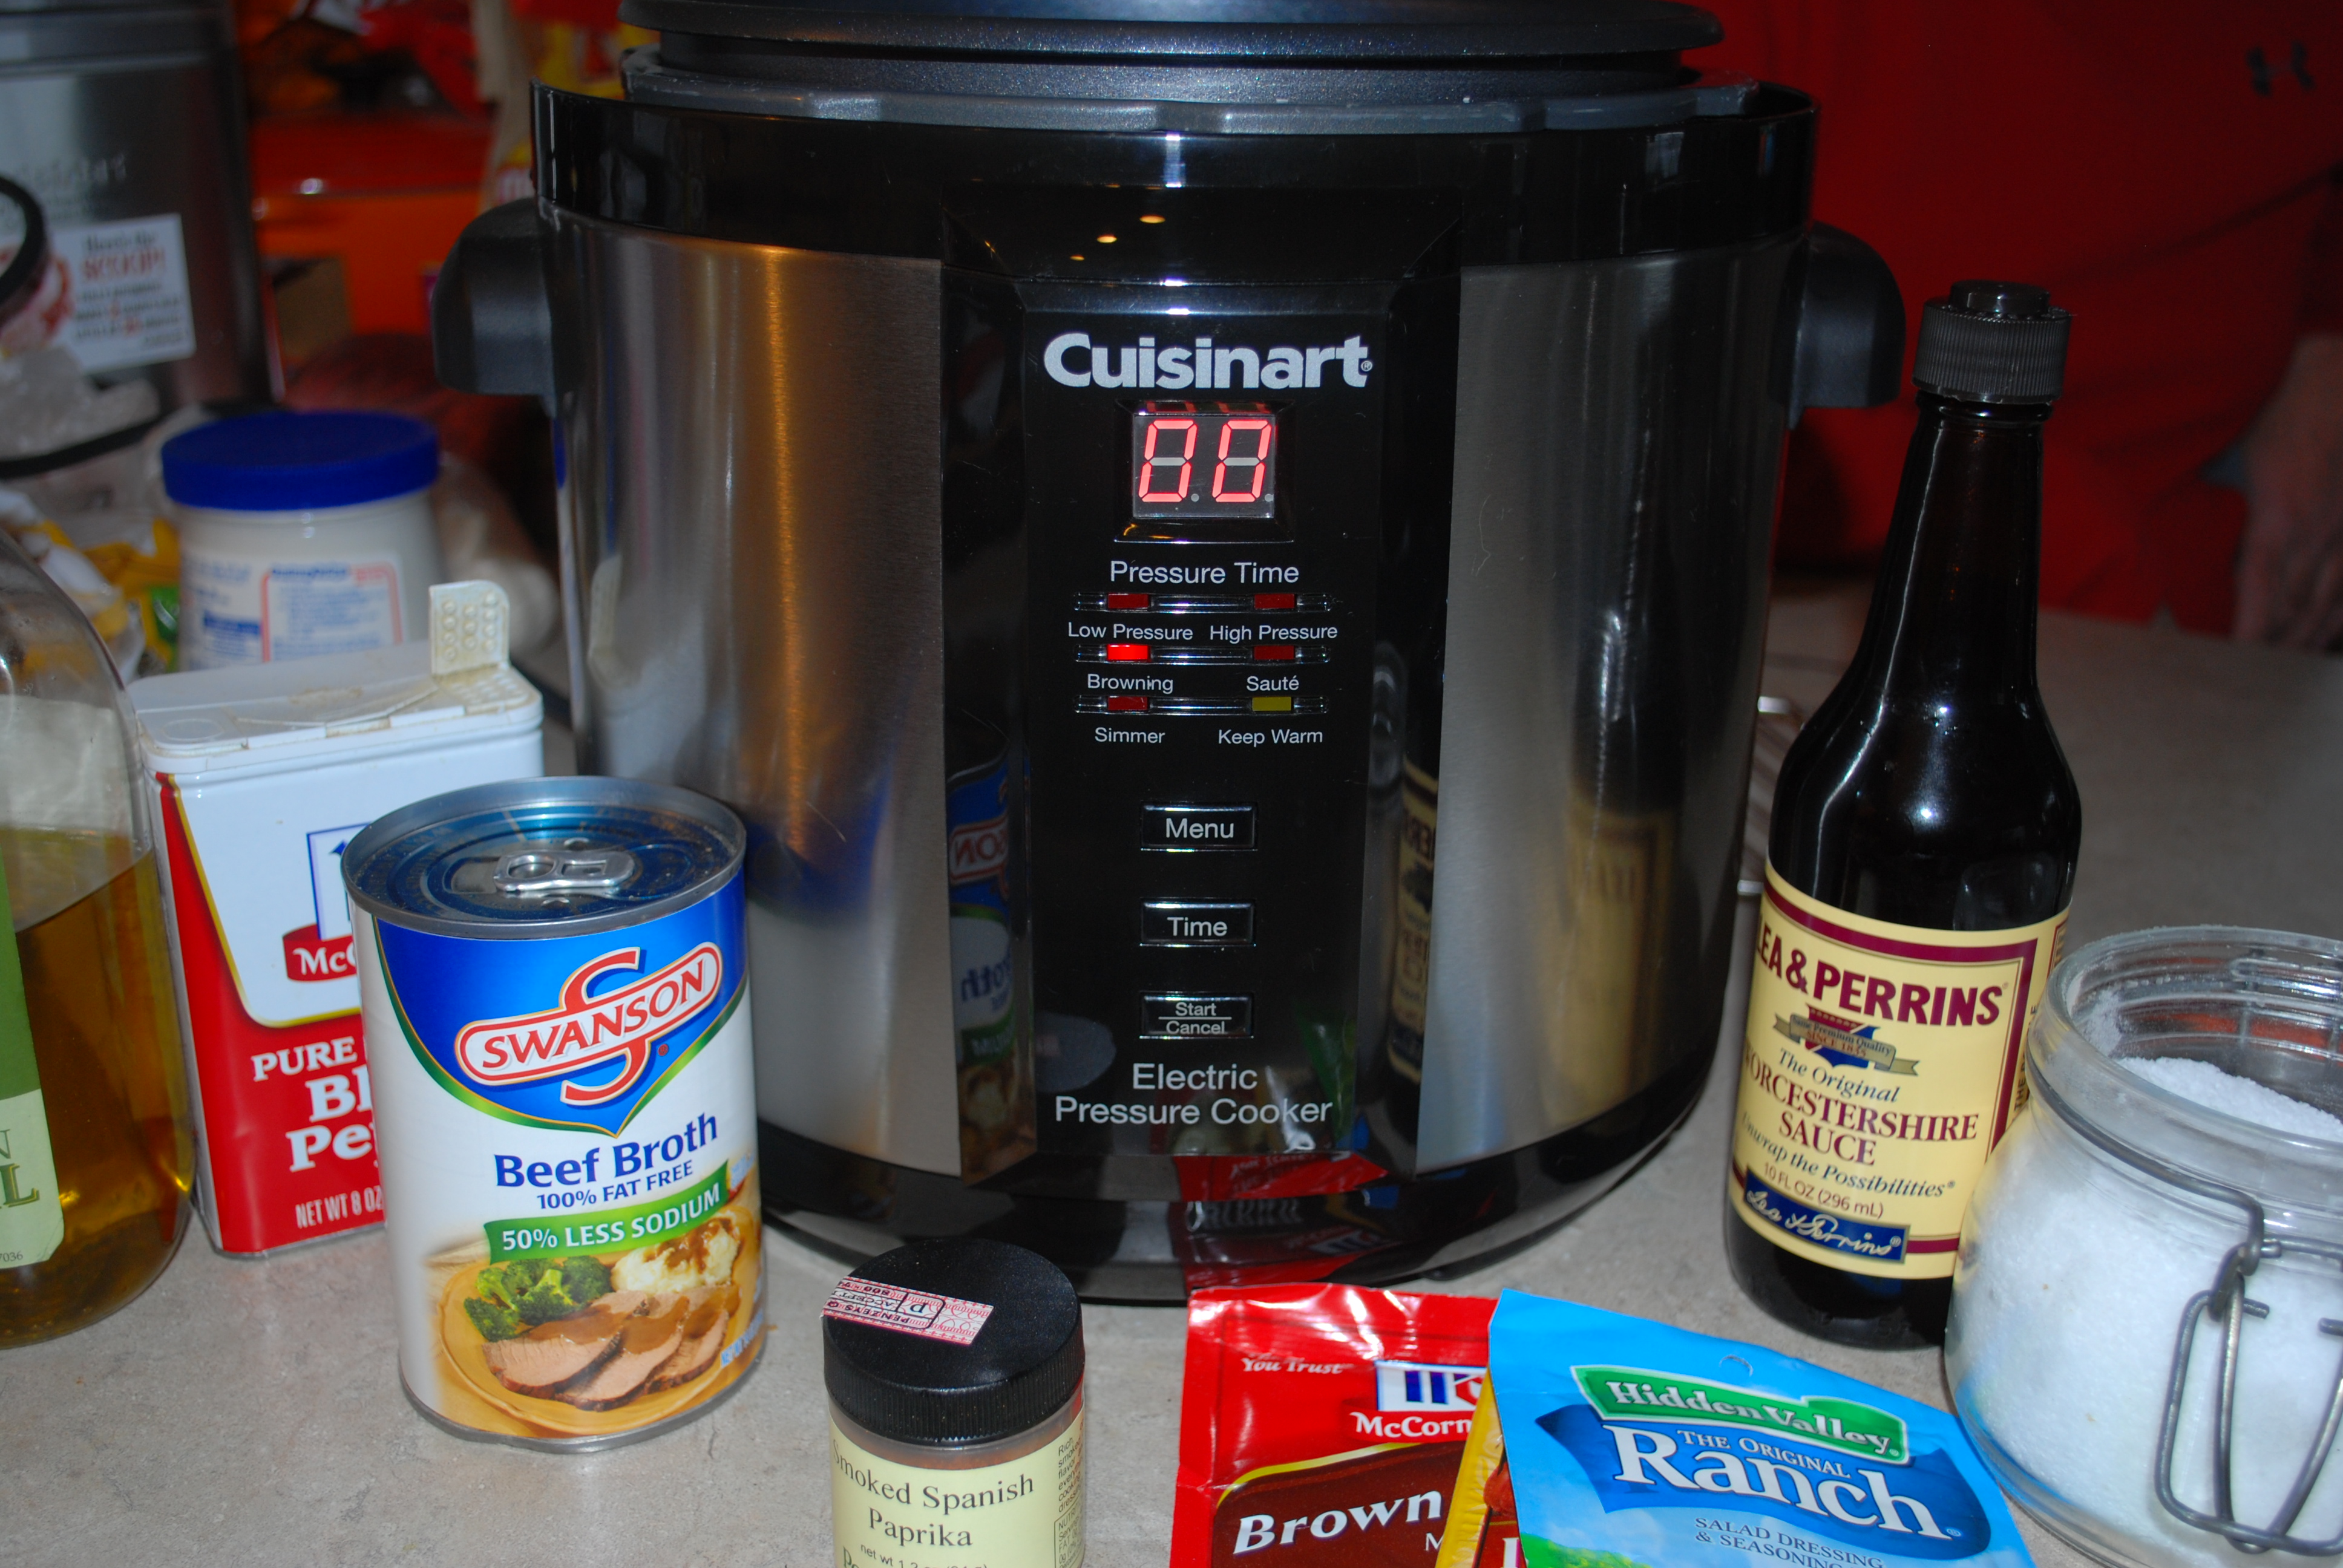 How To Cook With Cuisinart Electric Pressure Cooker